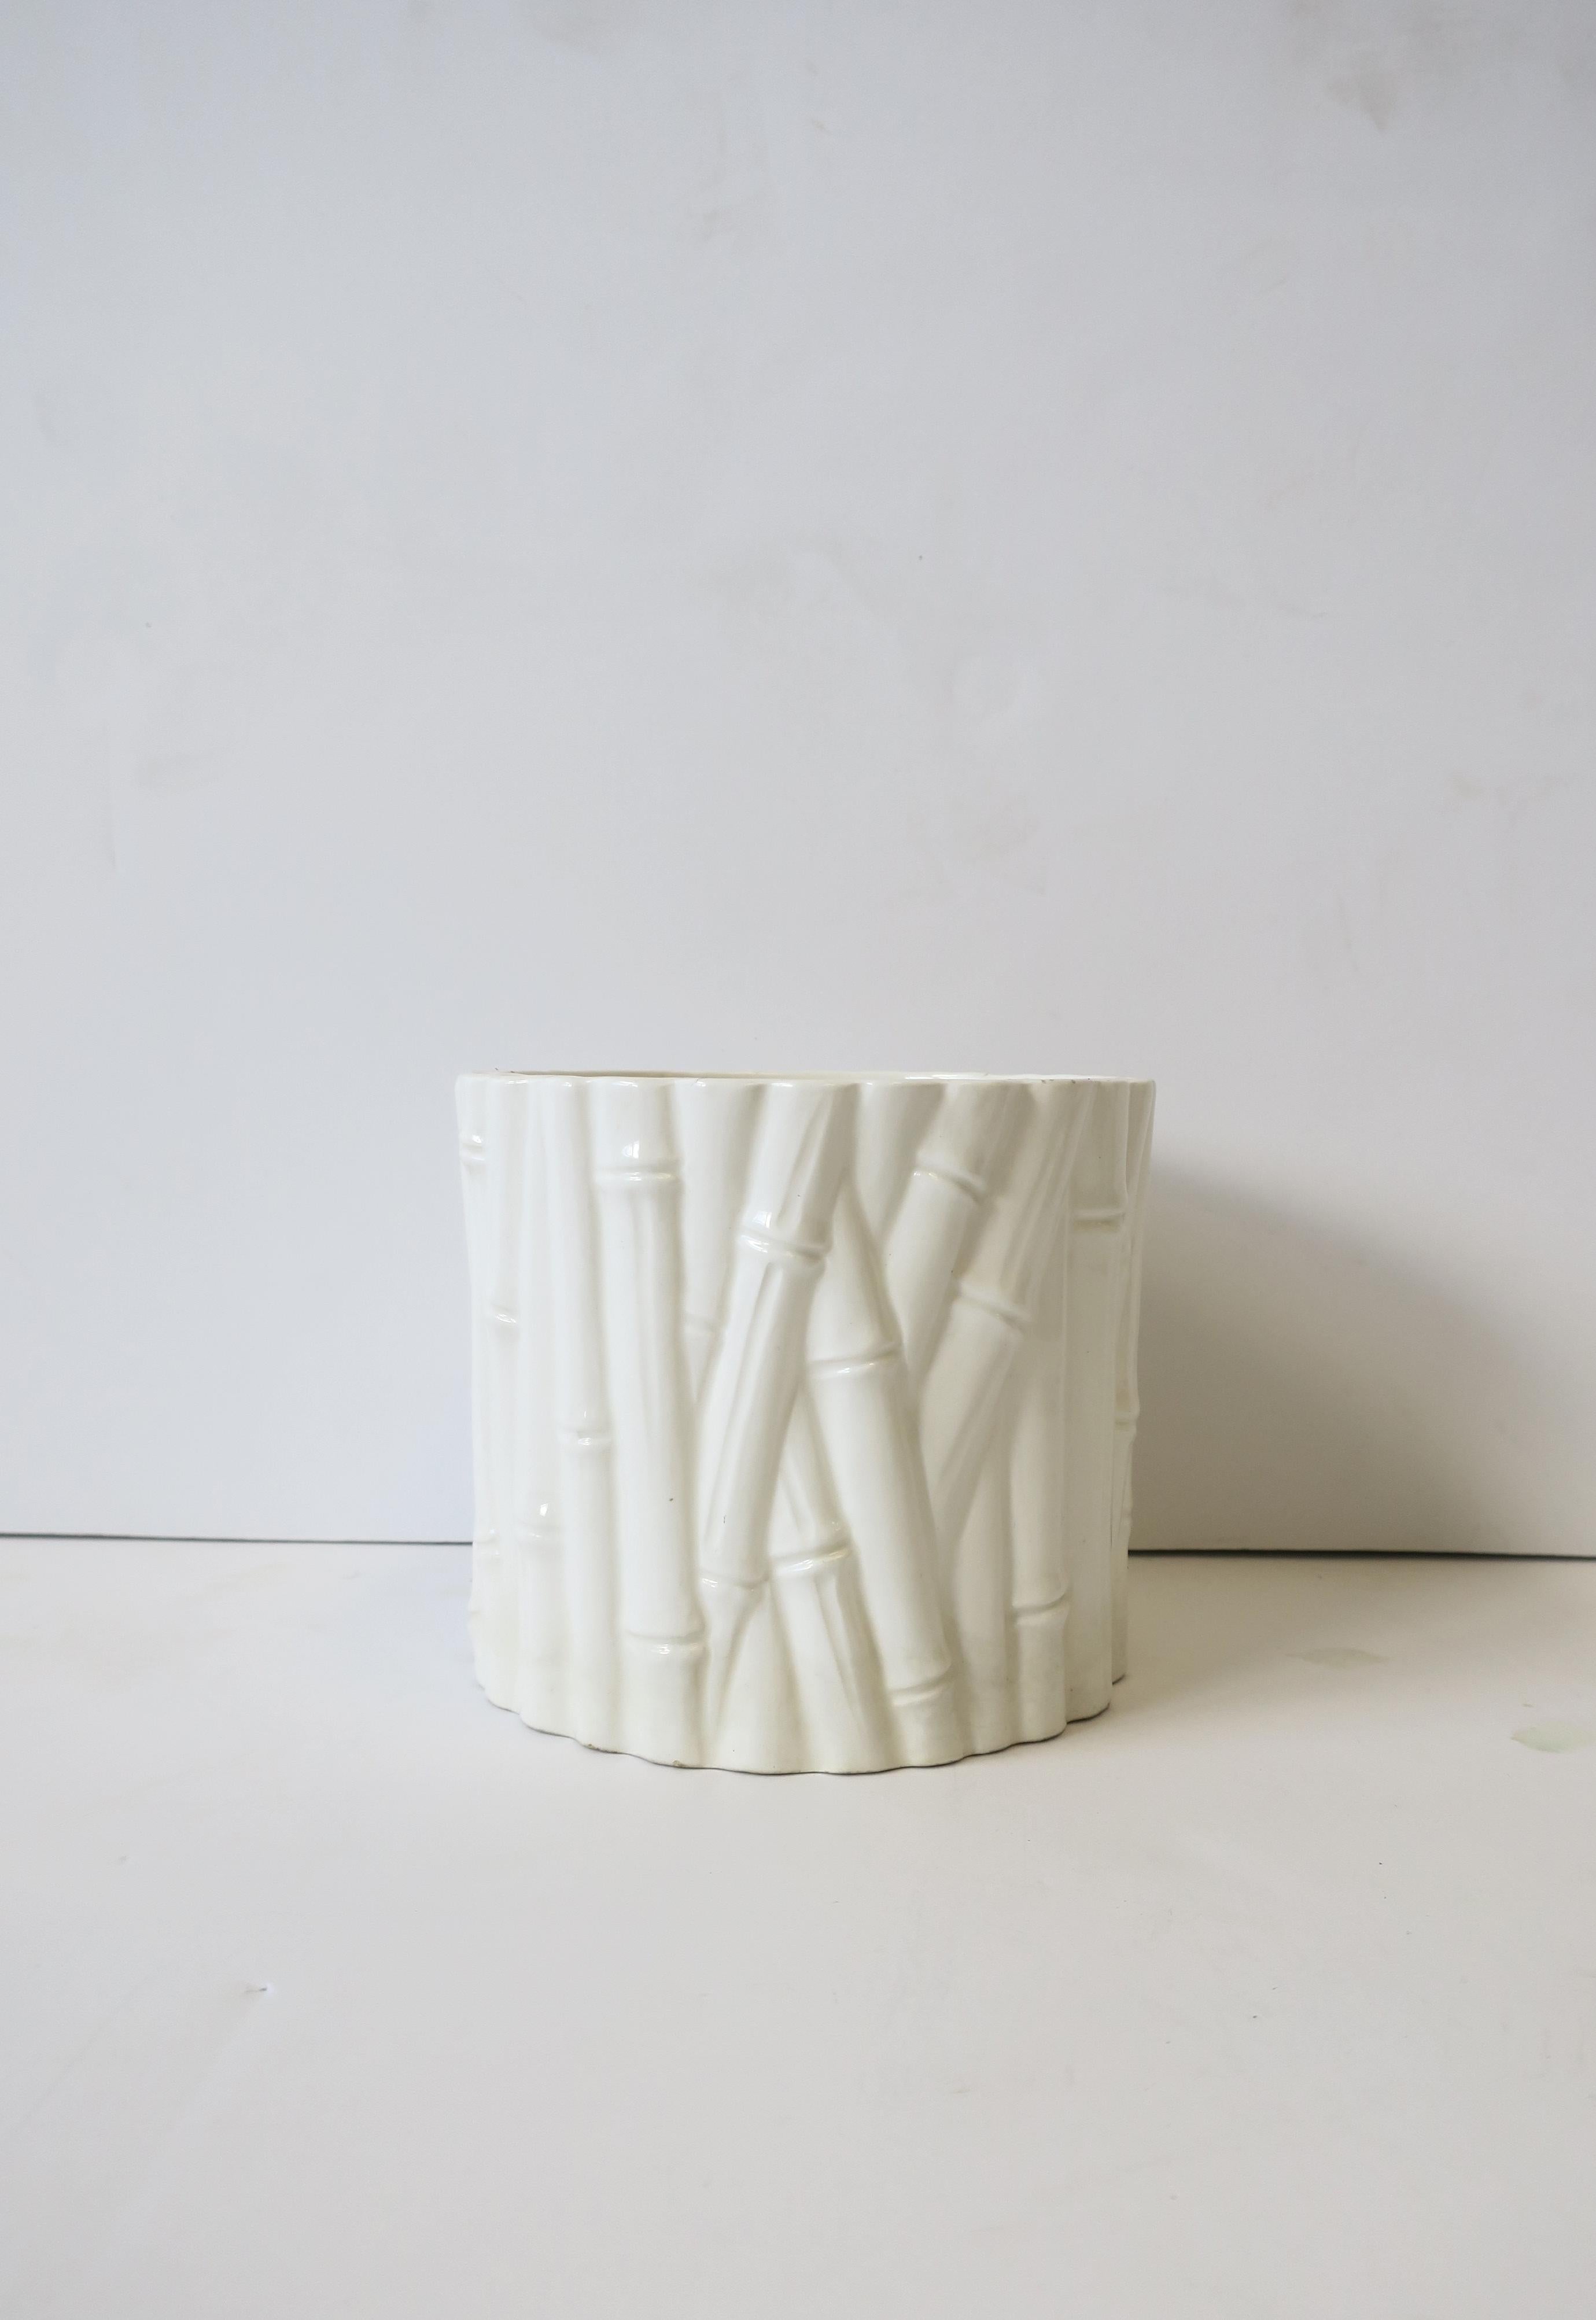 A round white ceramic cachepot or jardiniere with bamboo design, circa late 20th century, 1970s. Shown holding small flowering plant. Dimensions: 4.88